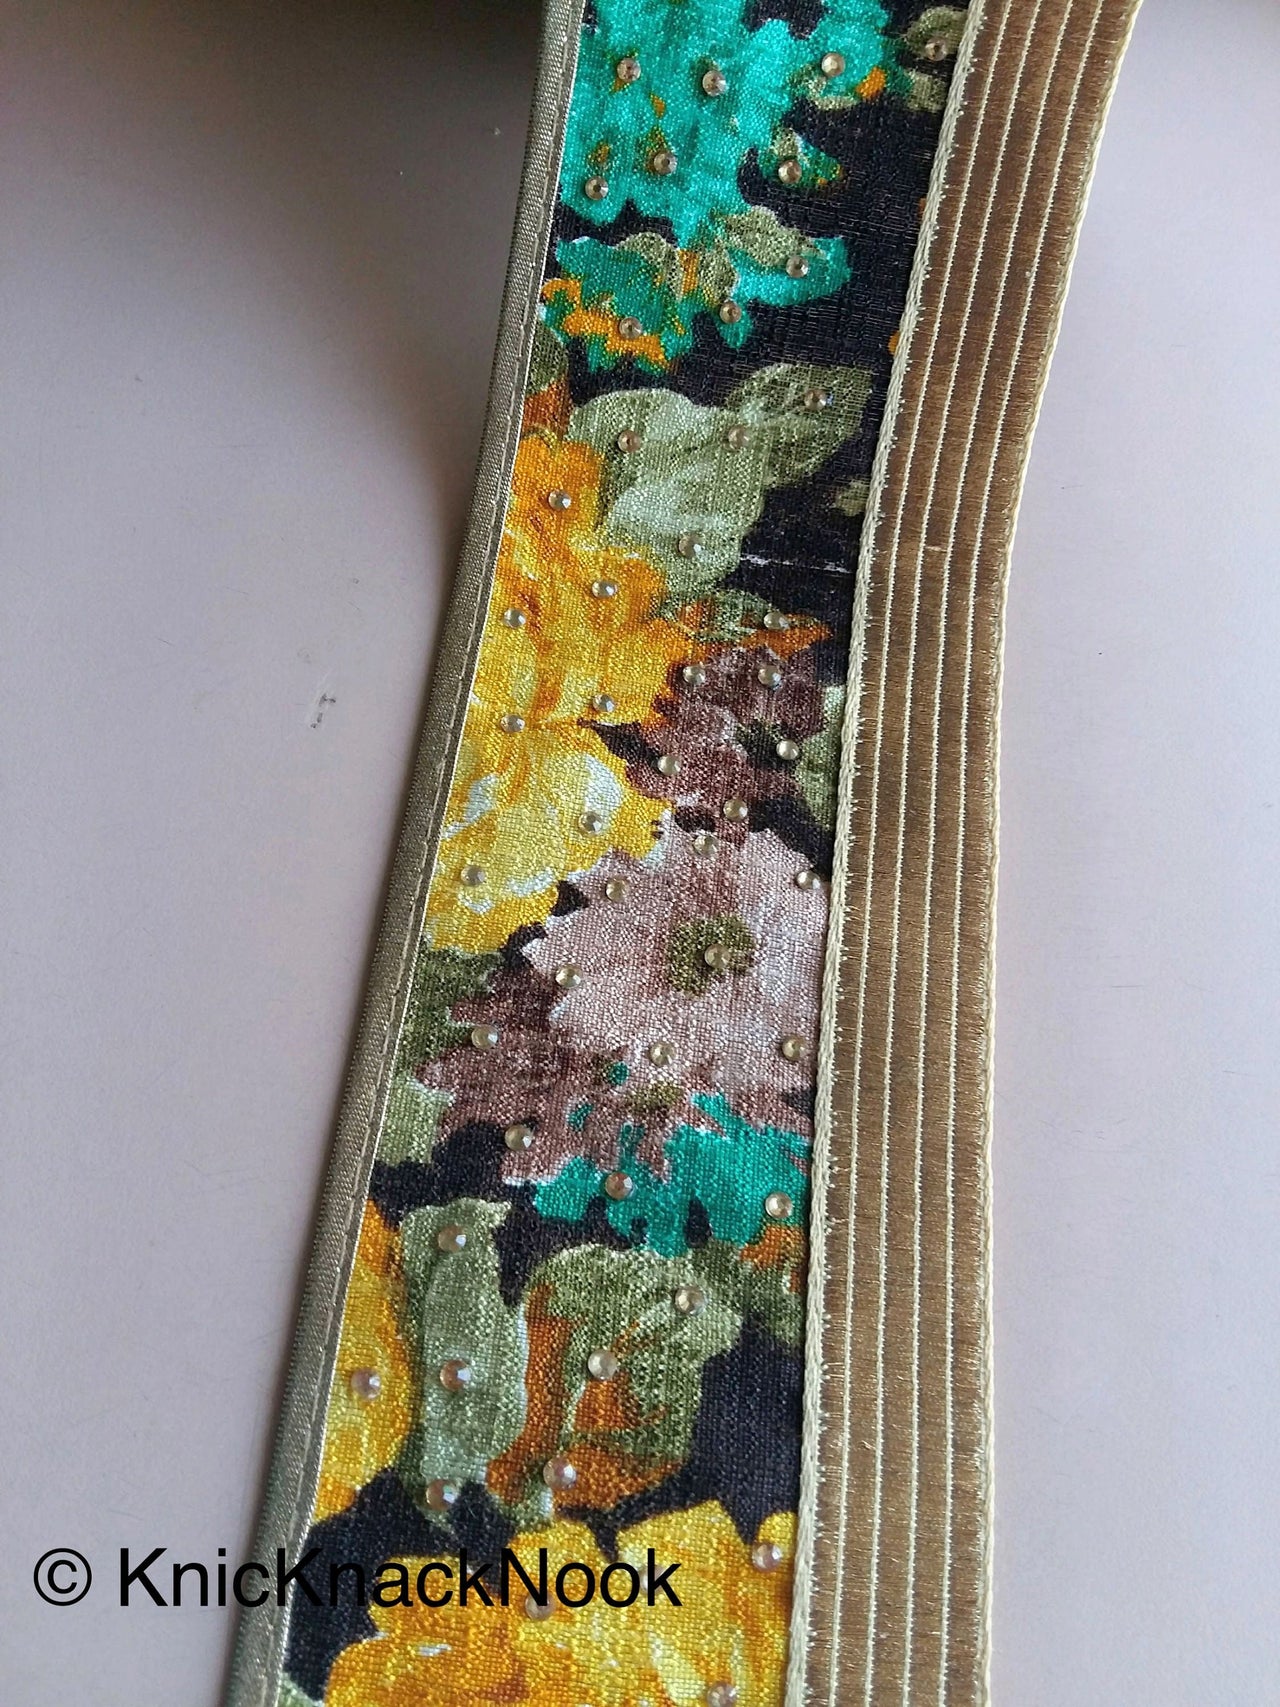 Brown And Gold Fabric Trim With Yellow, Green And Brown Floral Design Embellished With Diamantes, Digital Print Trim Border - 200317L404